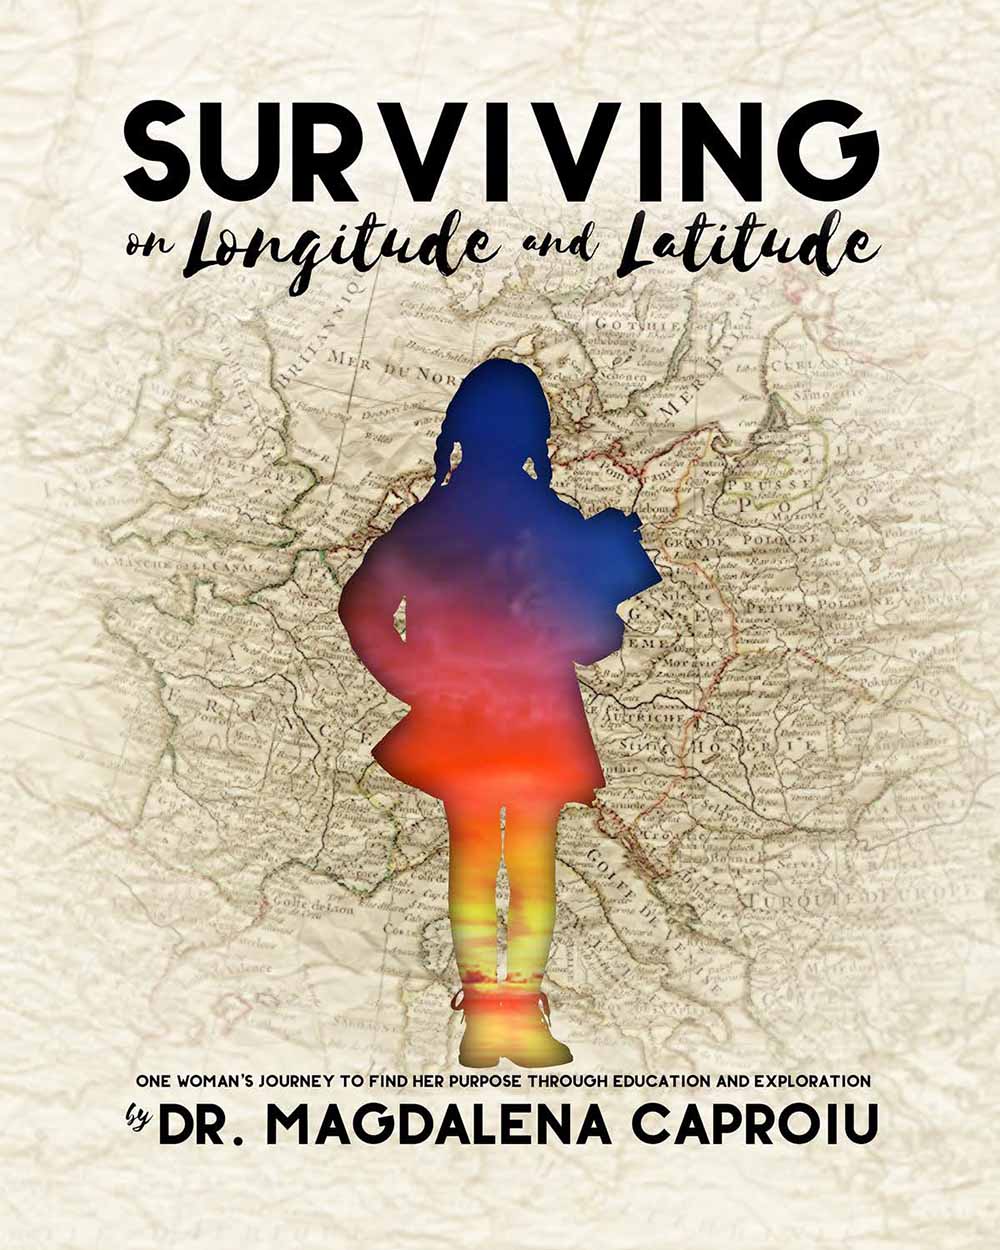 FREE: Surviving on Longitude and Latitude: One Woman’s Journey to Find Her Purpose Through Education and Exploration by Dr. Magdalena Caproiu